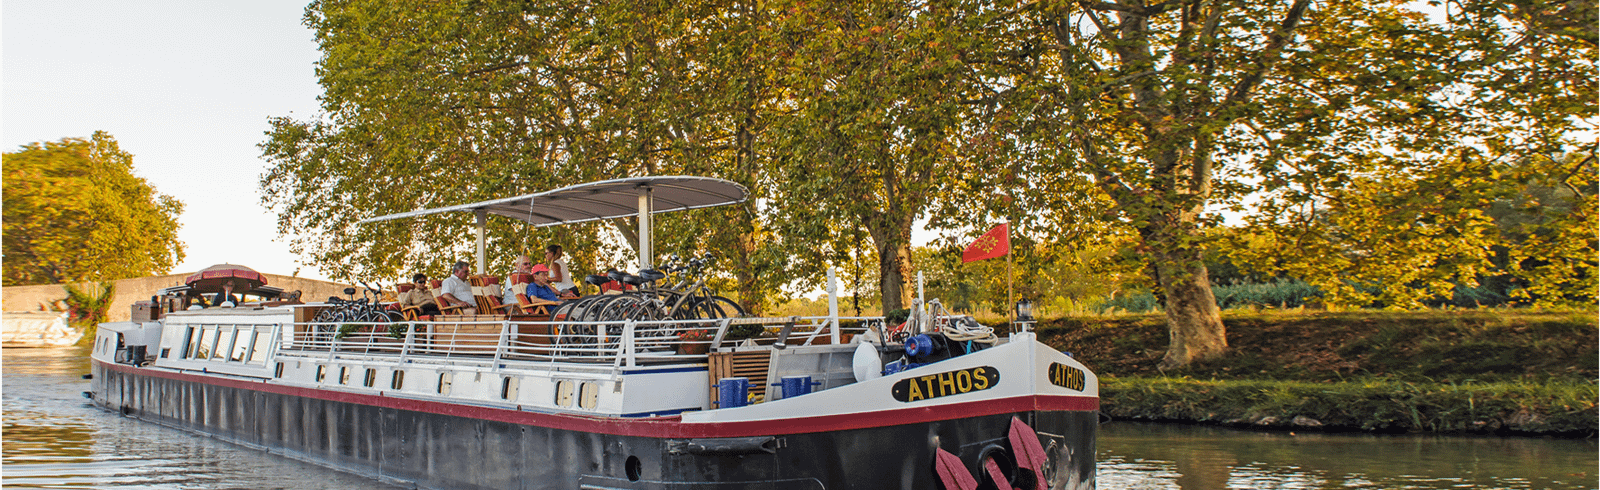 BARGE CRUISES Leisurely cruise the canals of Europe